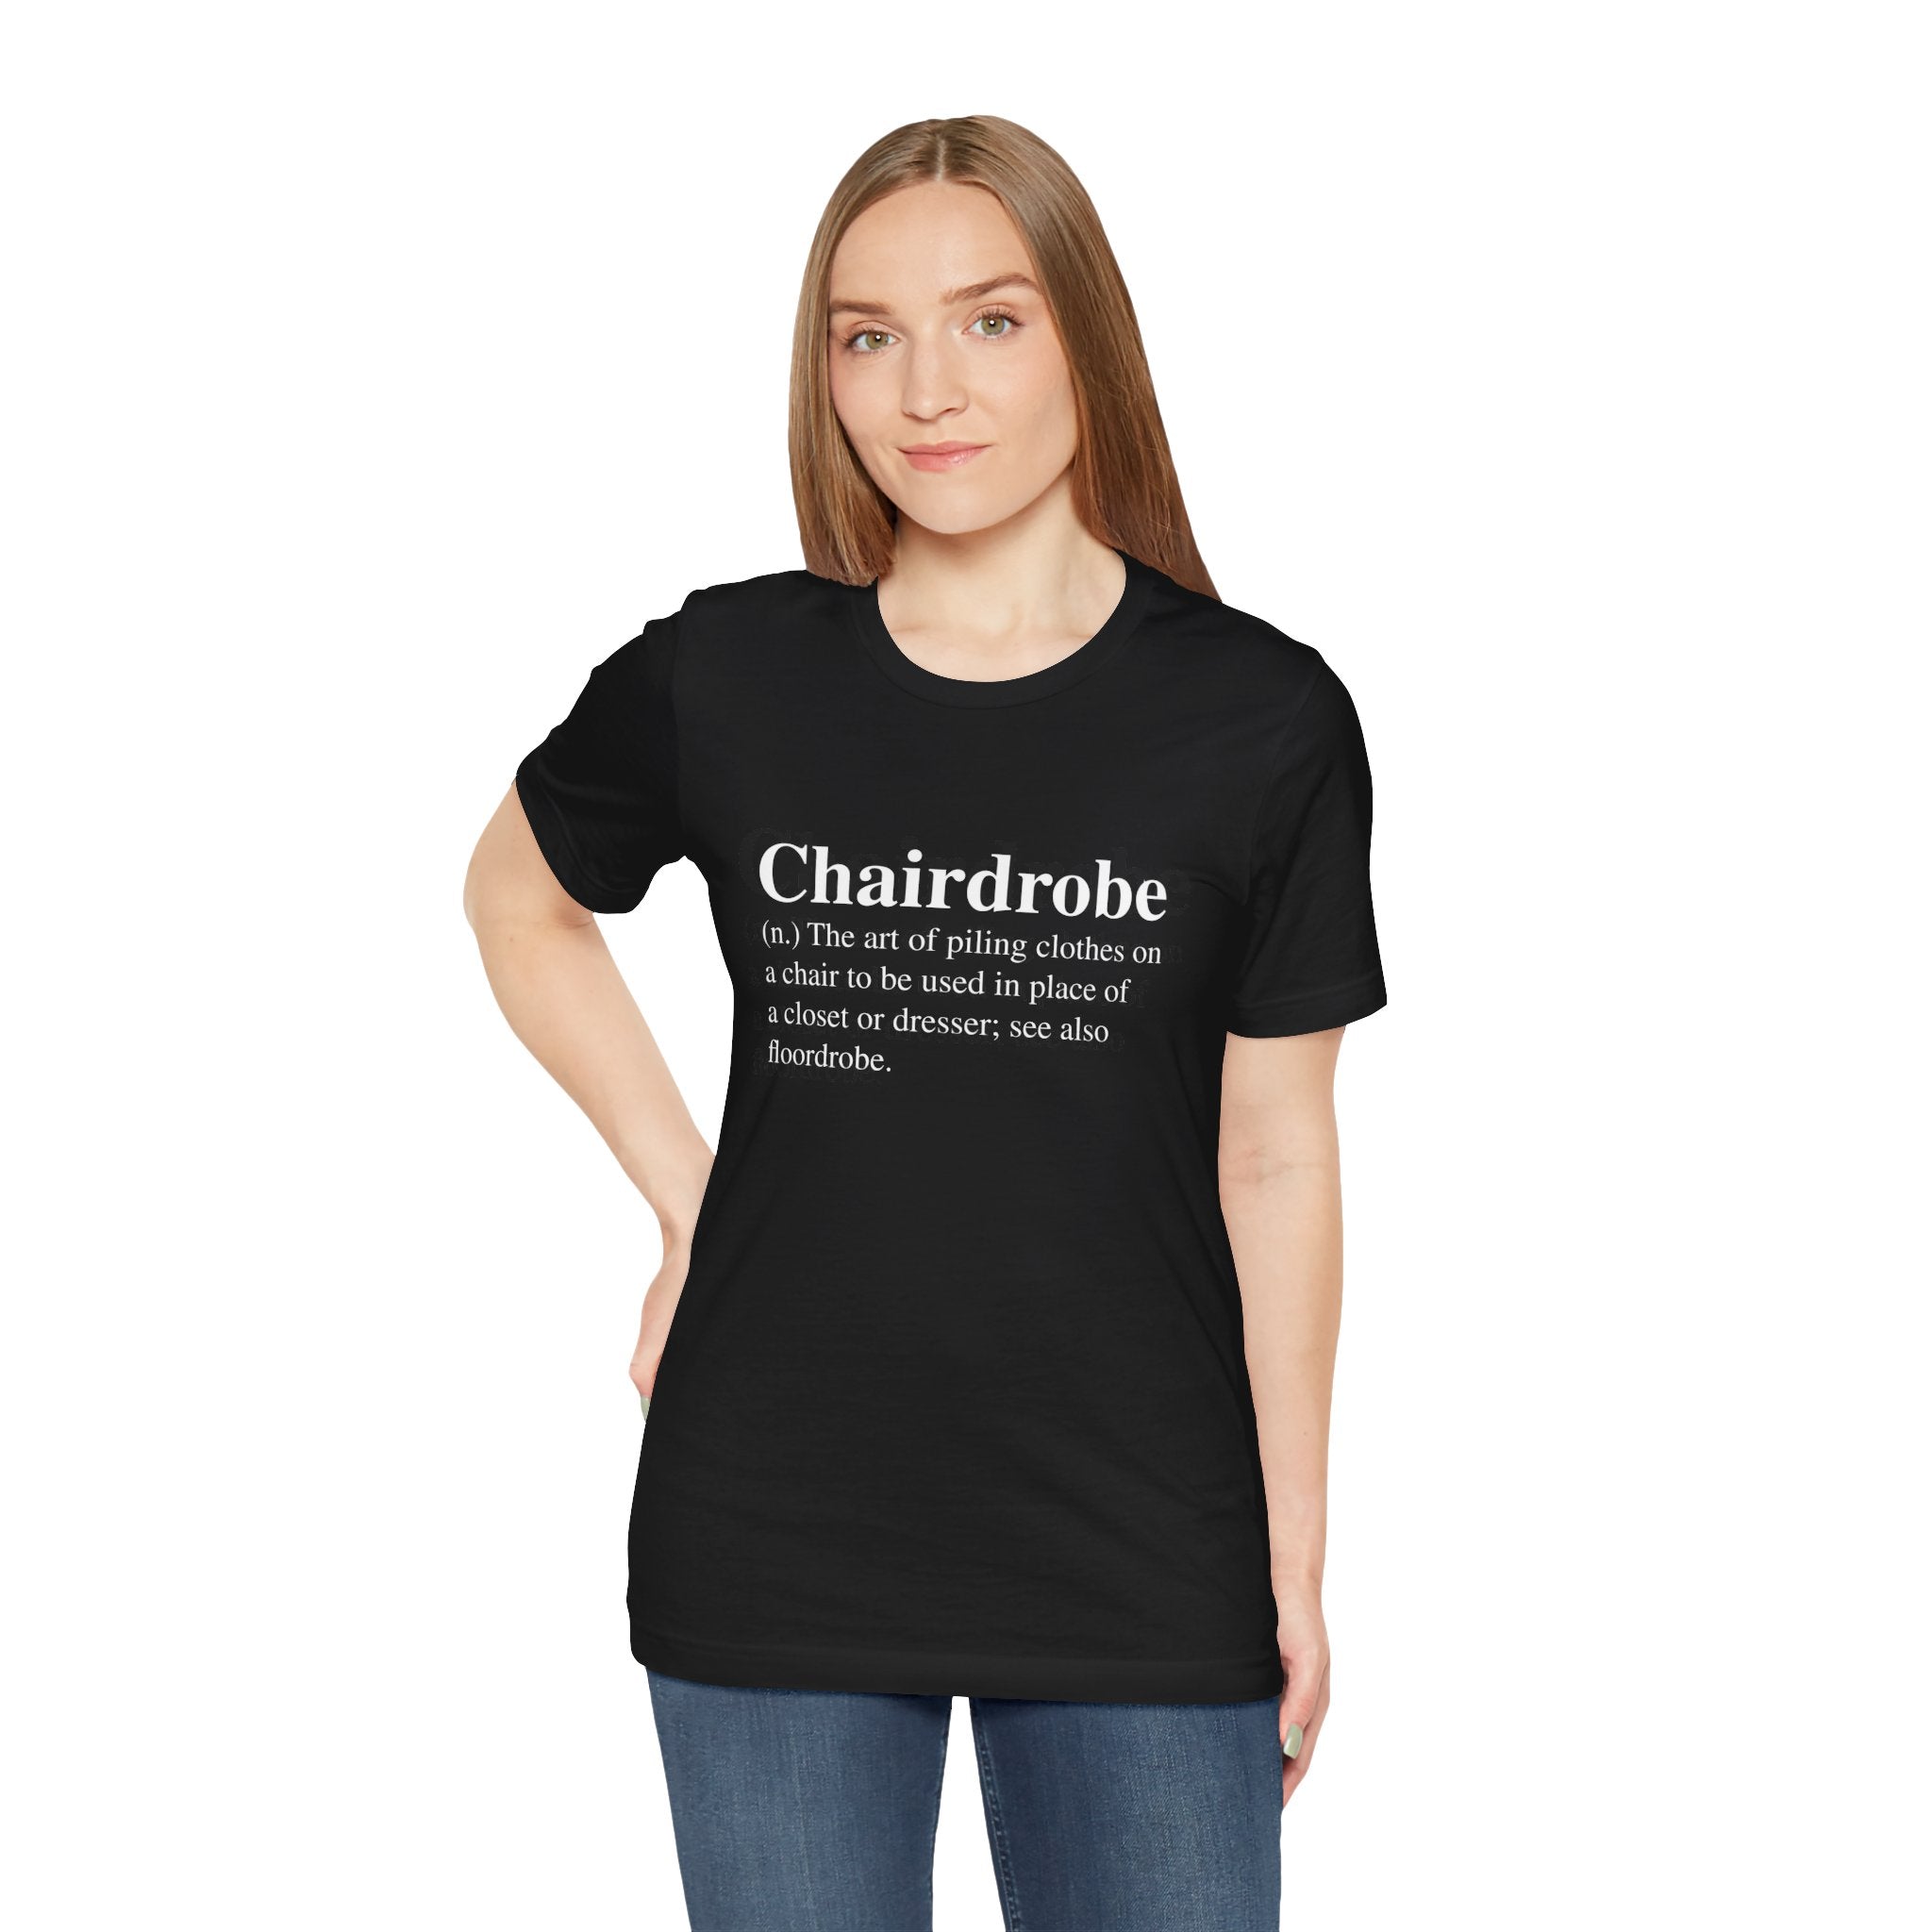 A young woman in a Chairdrobe T-shirt with the humorous word "chairdrobe" defined in white text, standing against a plain background.